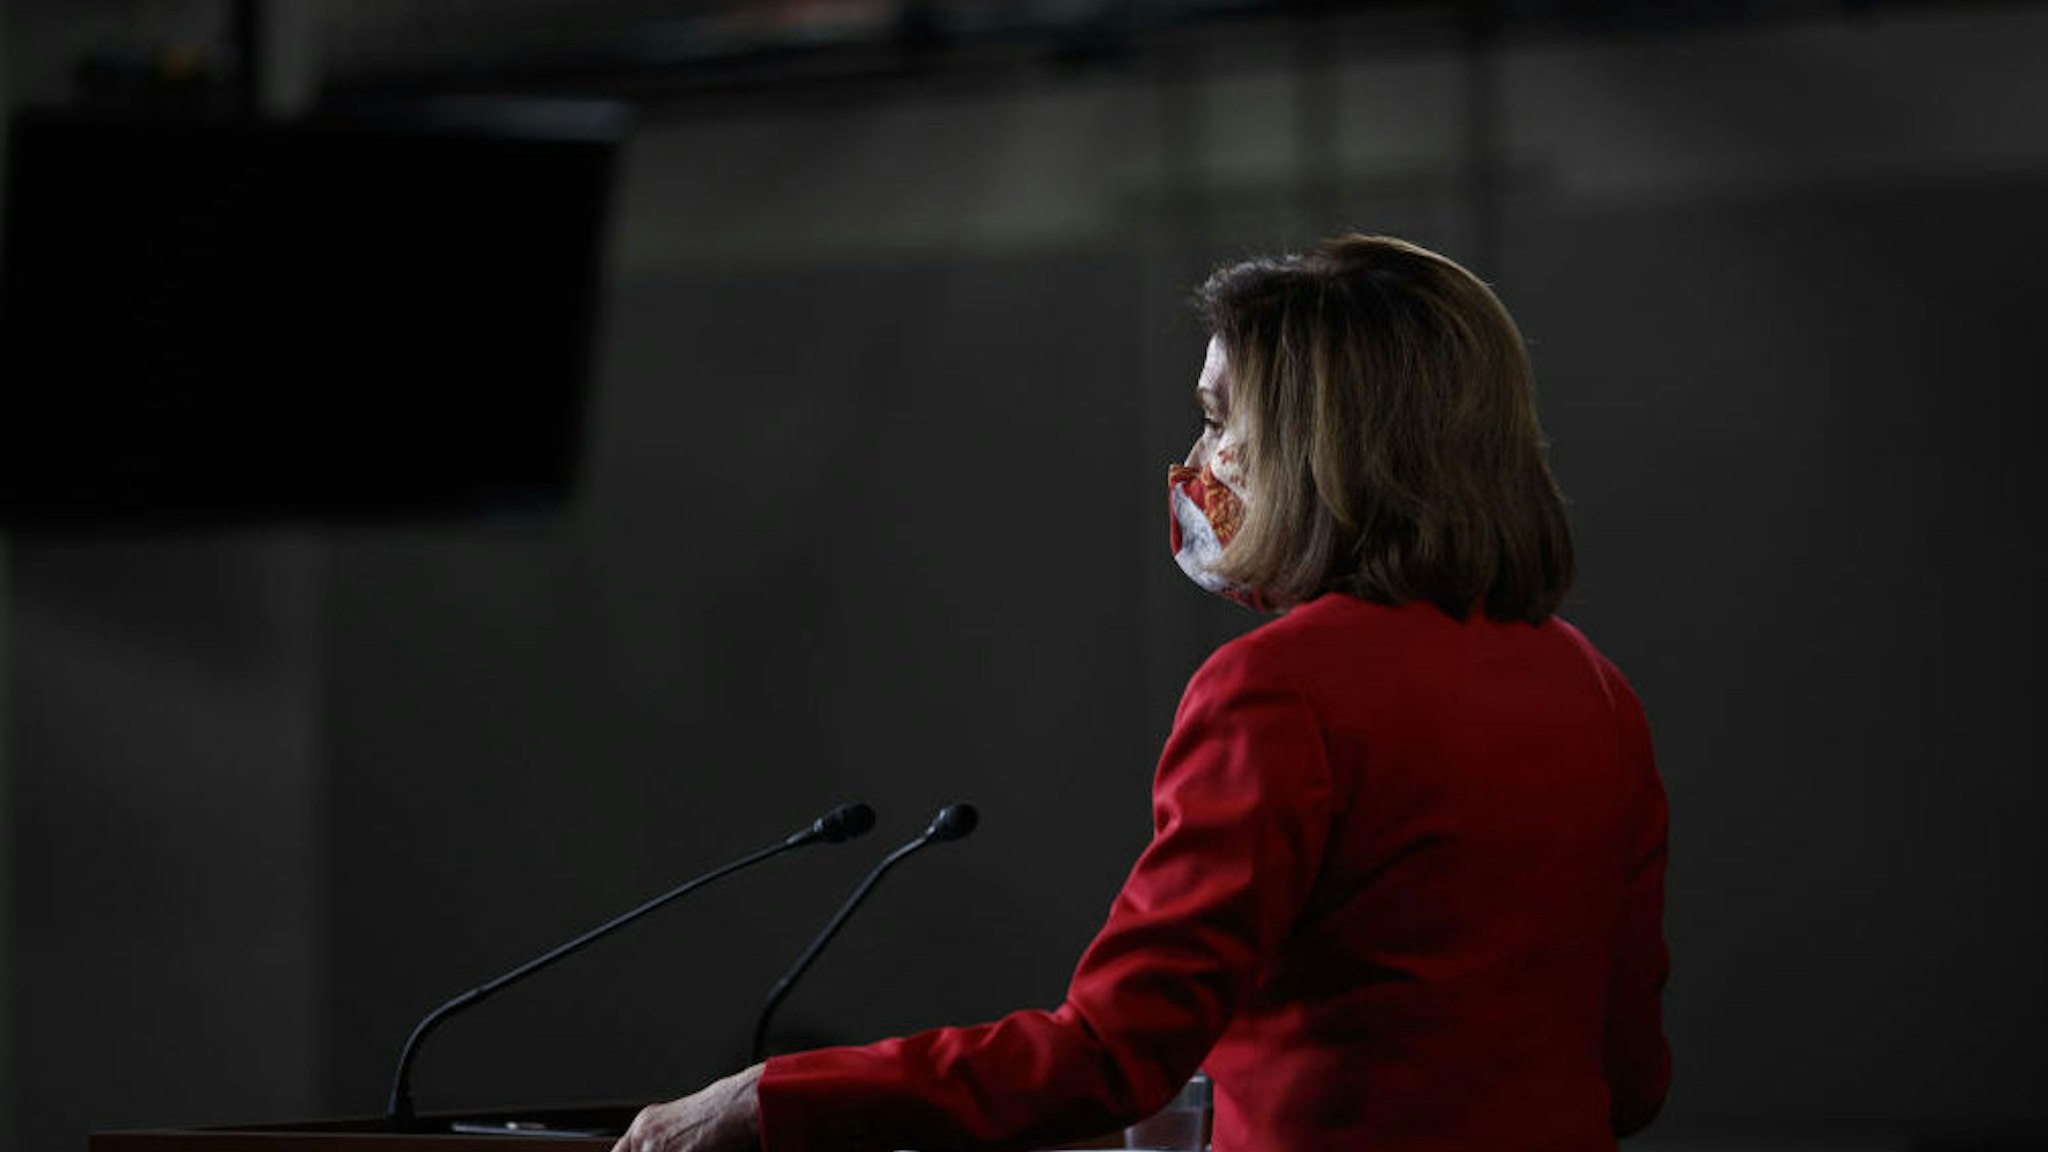 U.S. House Speaker Nancy Pelosi, a Democrat from California, speaks during a news conference at the U.S. Capitol in Washington, D.C., U.S., on Wednesday, Dec. 30, 2020. The prospects for boosting stimulus payments for most Americans to $2,000 are fading fast in the Republican-controlled U.S. Senate even with GOP leaders under pressure by both President Donald Trump and congressional Democrats.